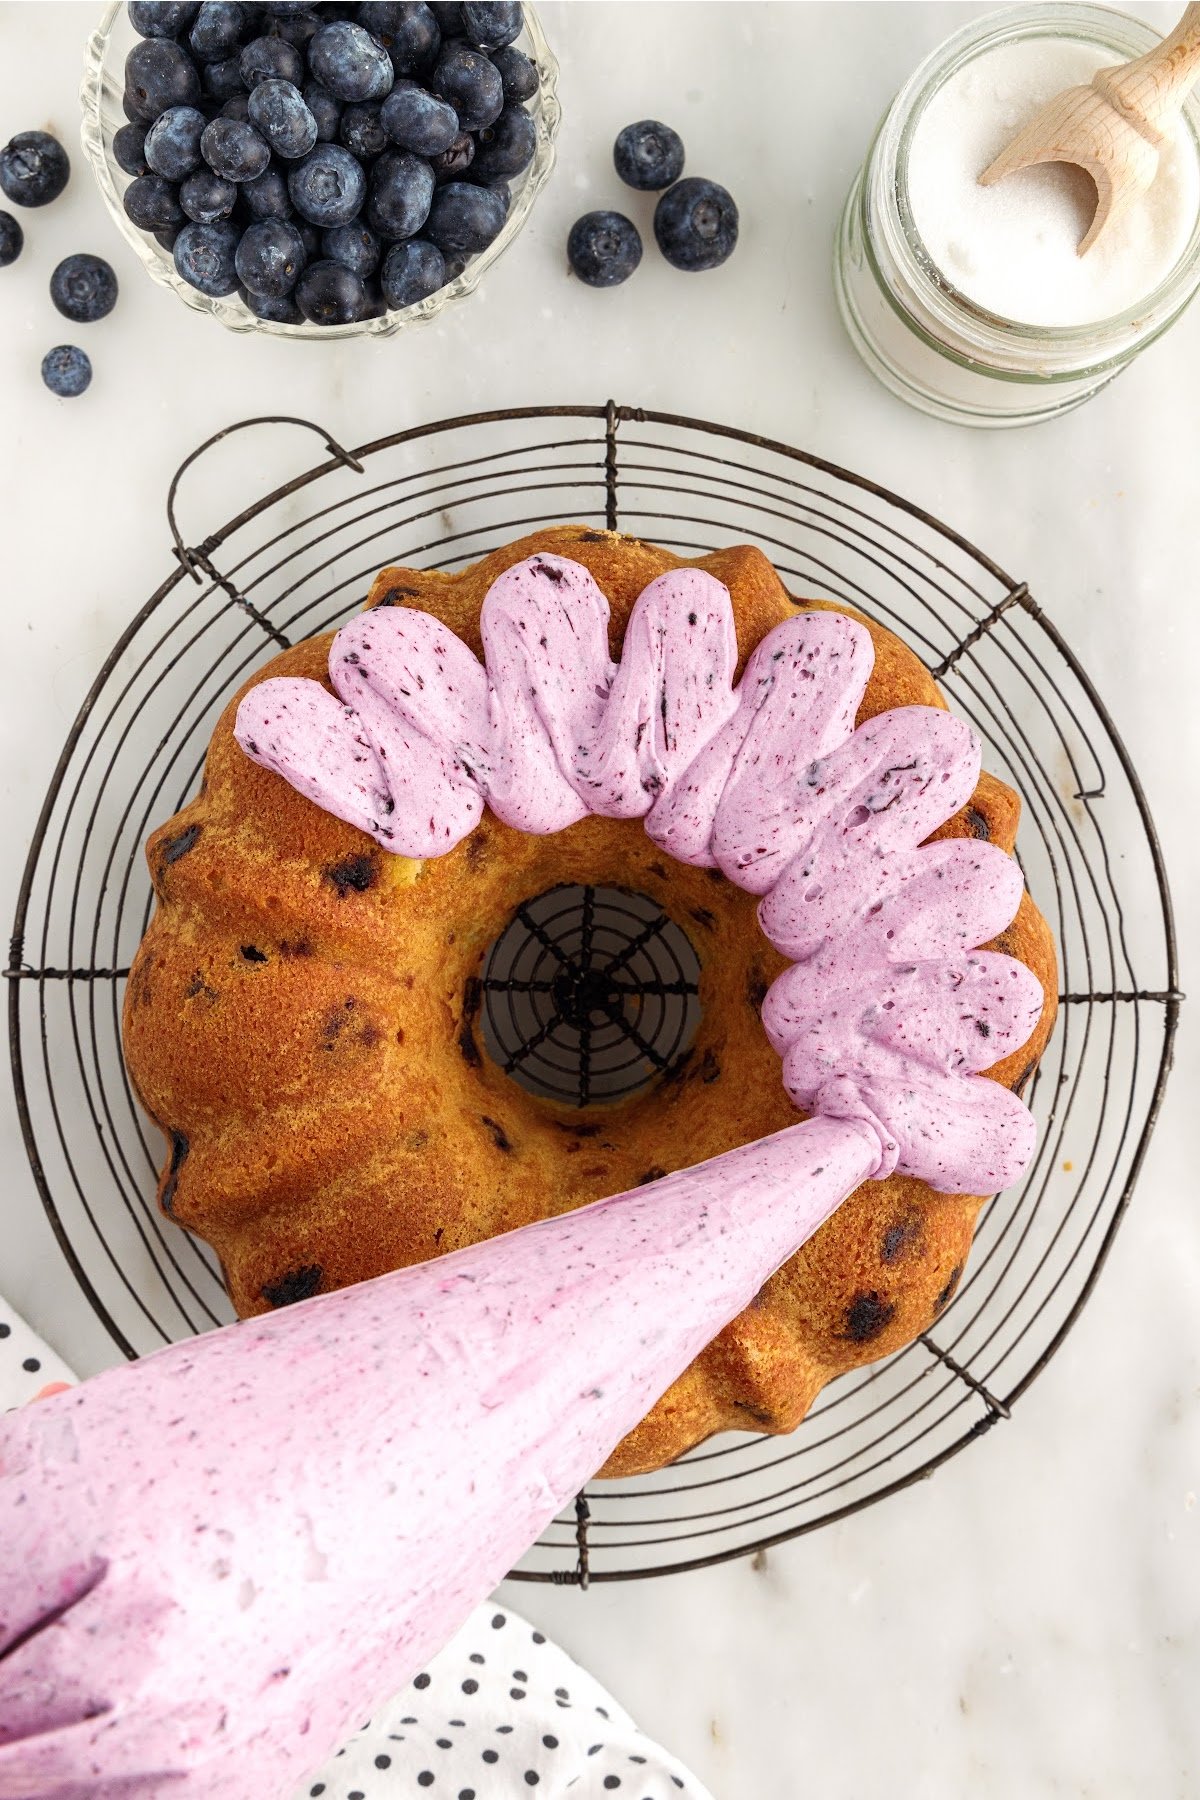 Blueberry Pound Cake piped with blueberry cream cheese frosting.